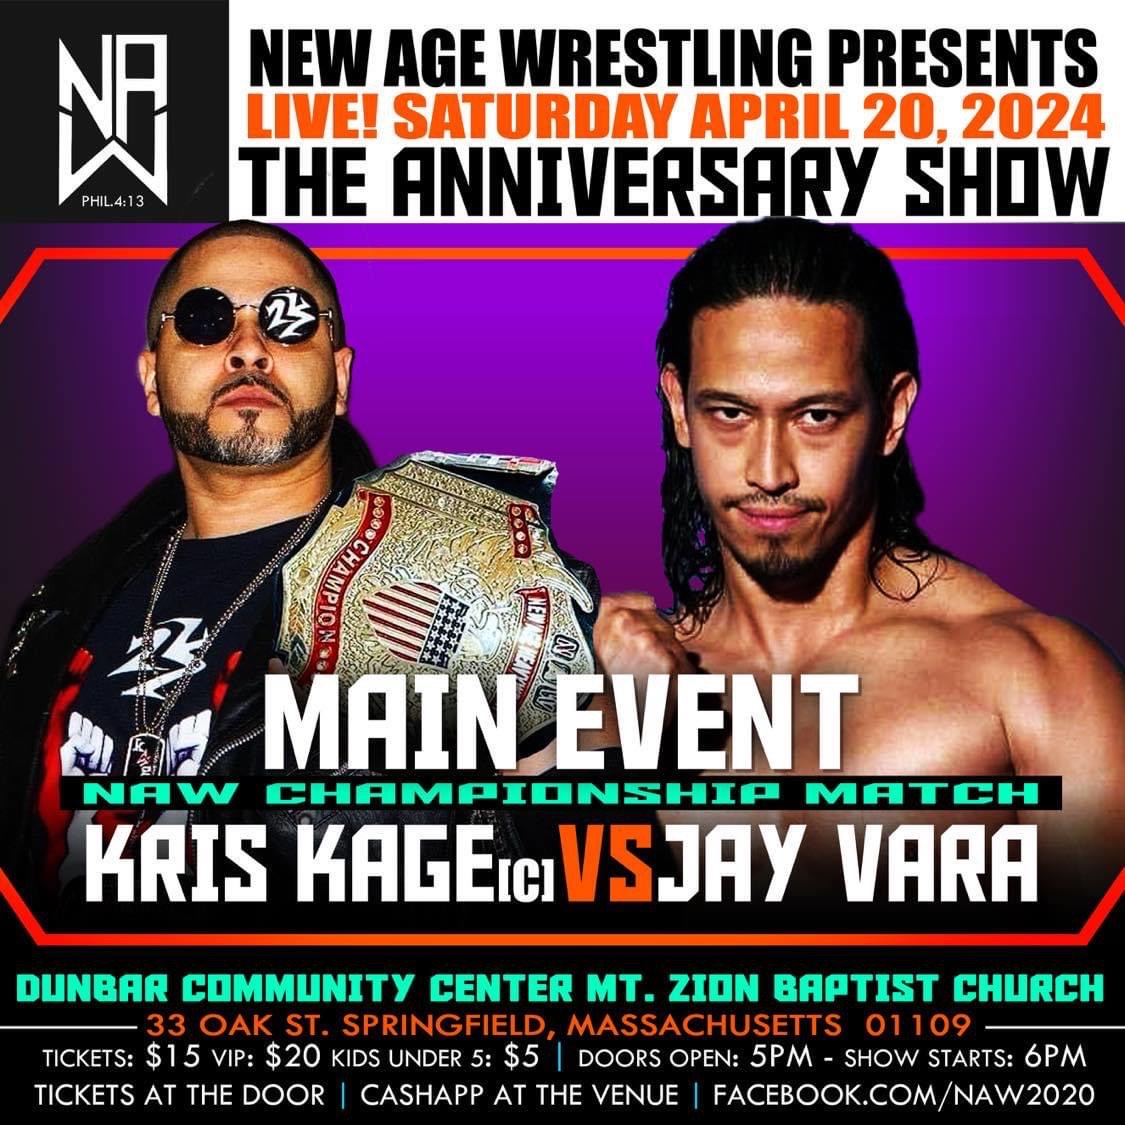 New Age Wrestling 16th Anniversary Show This Saturday